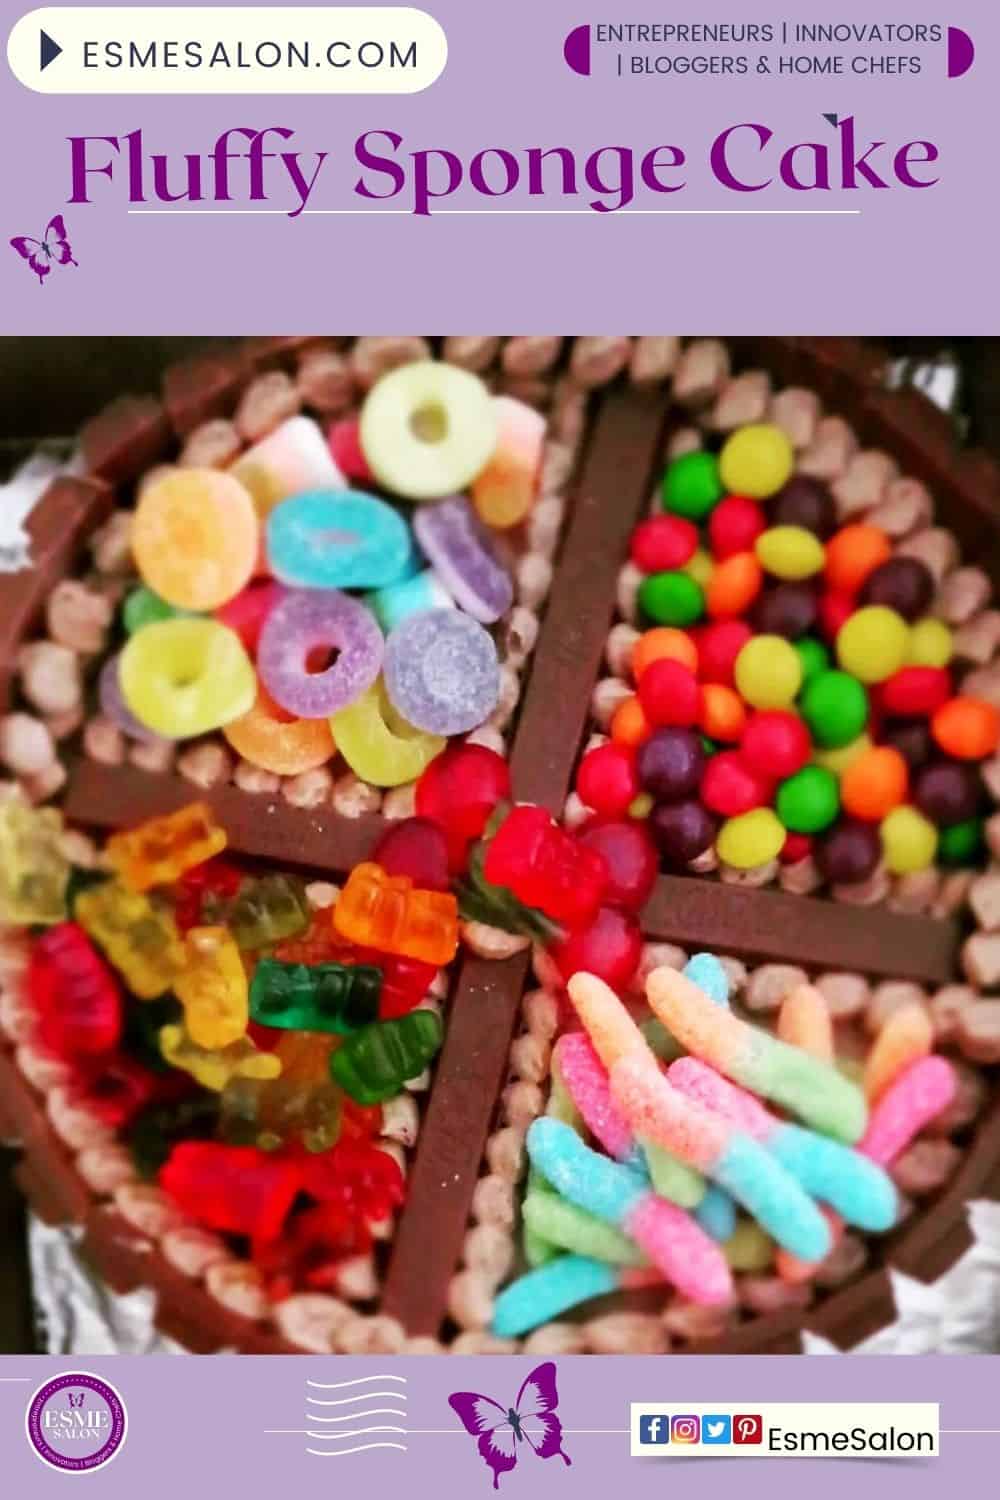 an image of Light and Fluffy Sponge Cake with Kitkat around the edge and lots of other candies as decoration